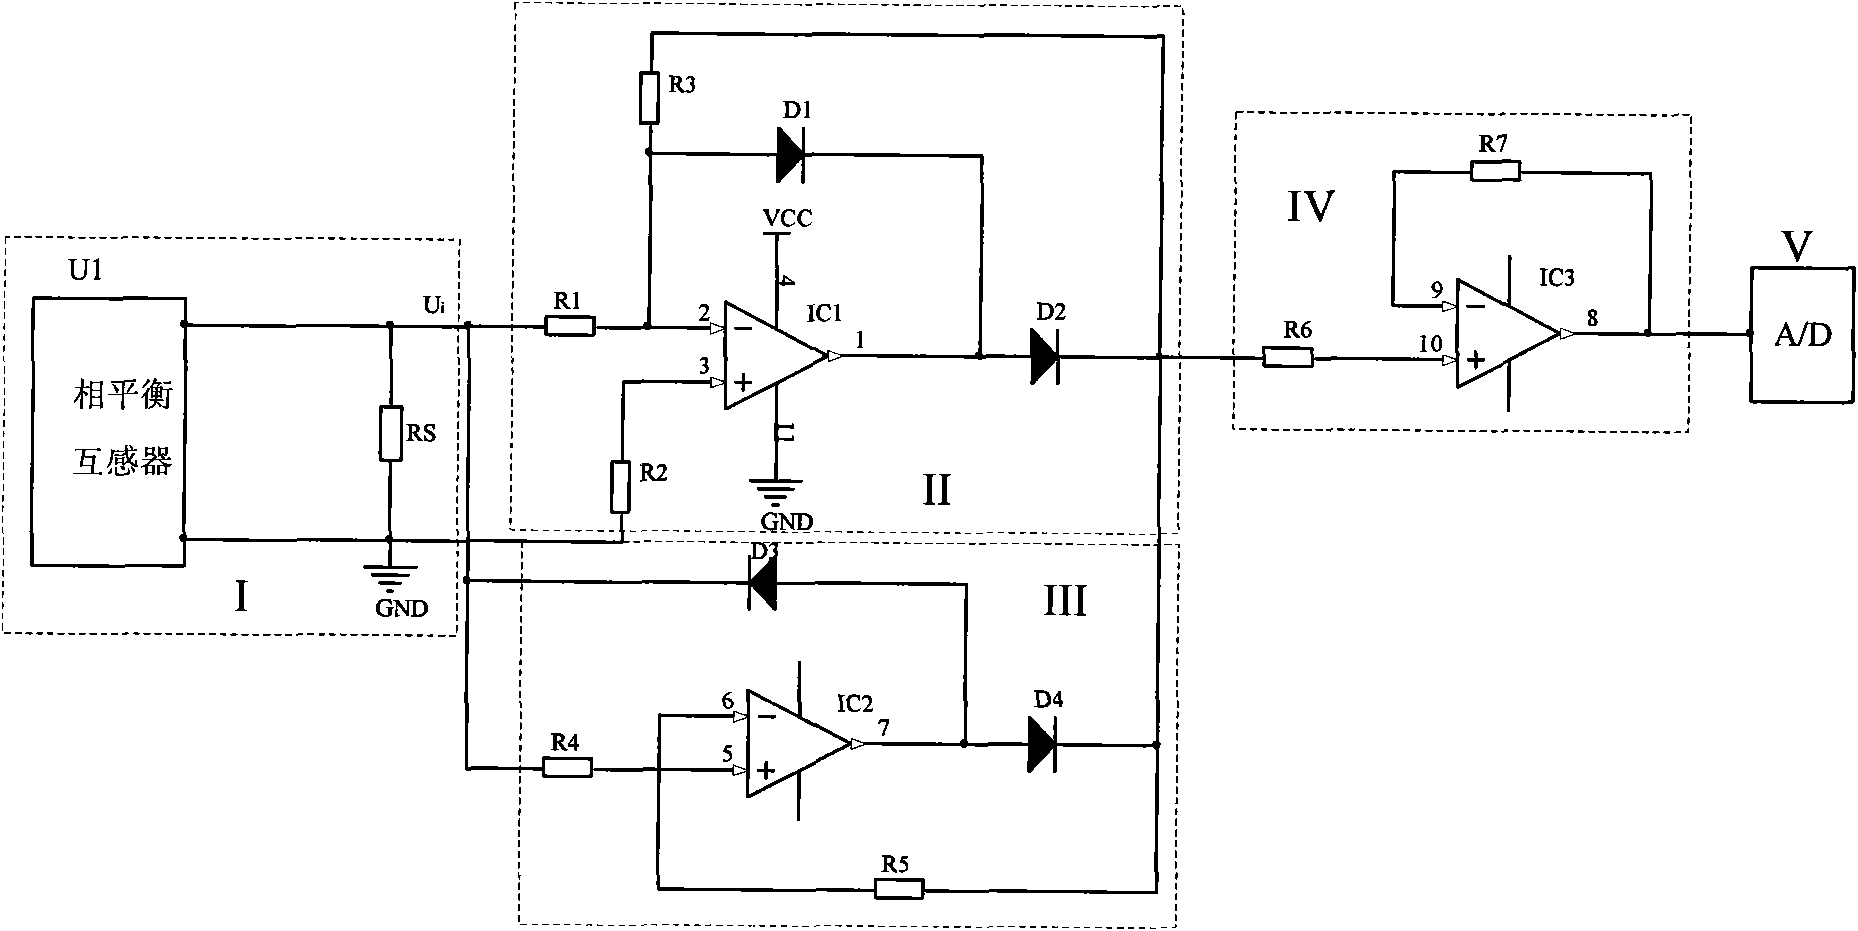 Circuit for conditioning micro-current/voltage conversion signal